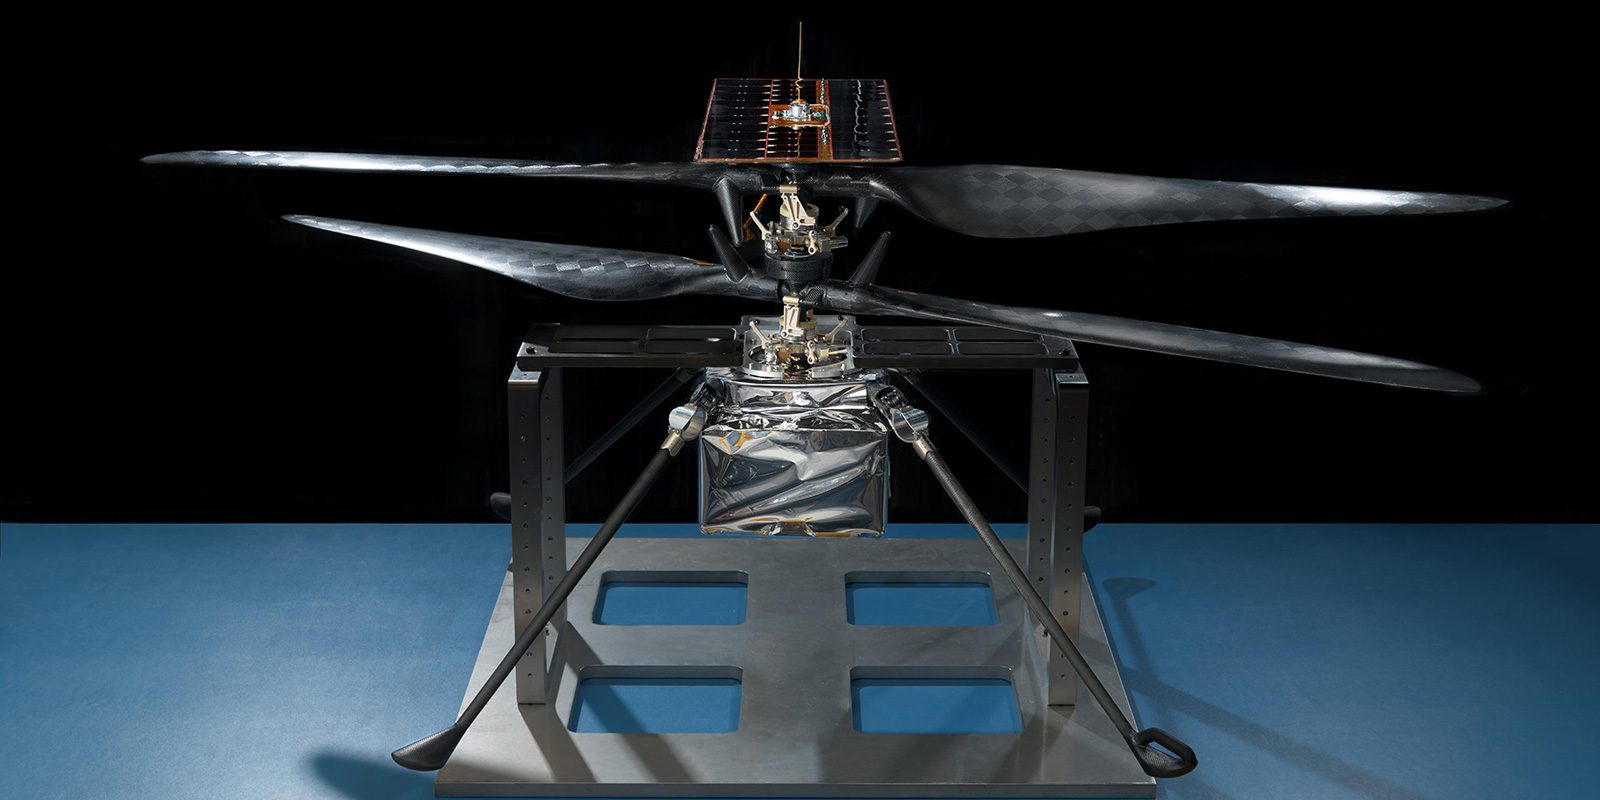 Image depicting Ingenuity the Mars helicopter